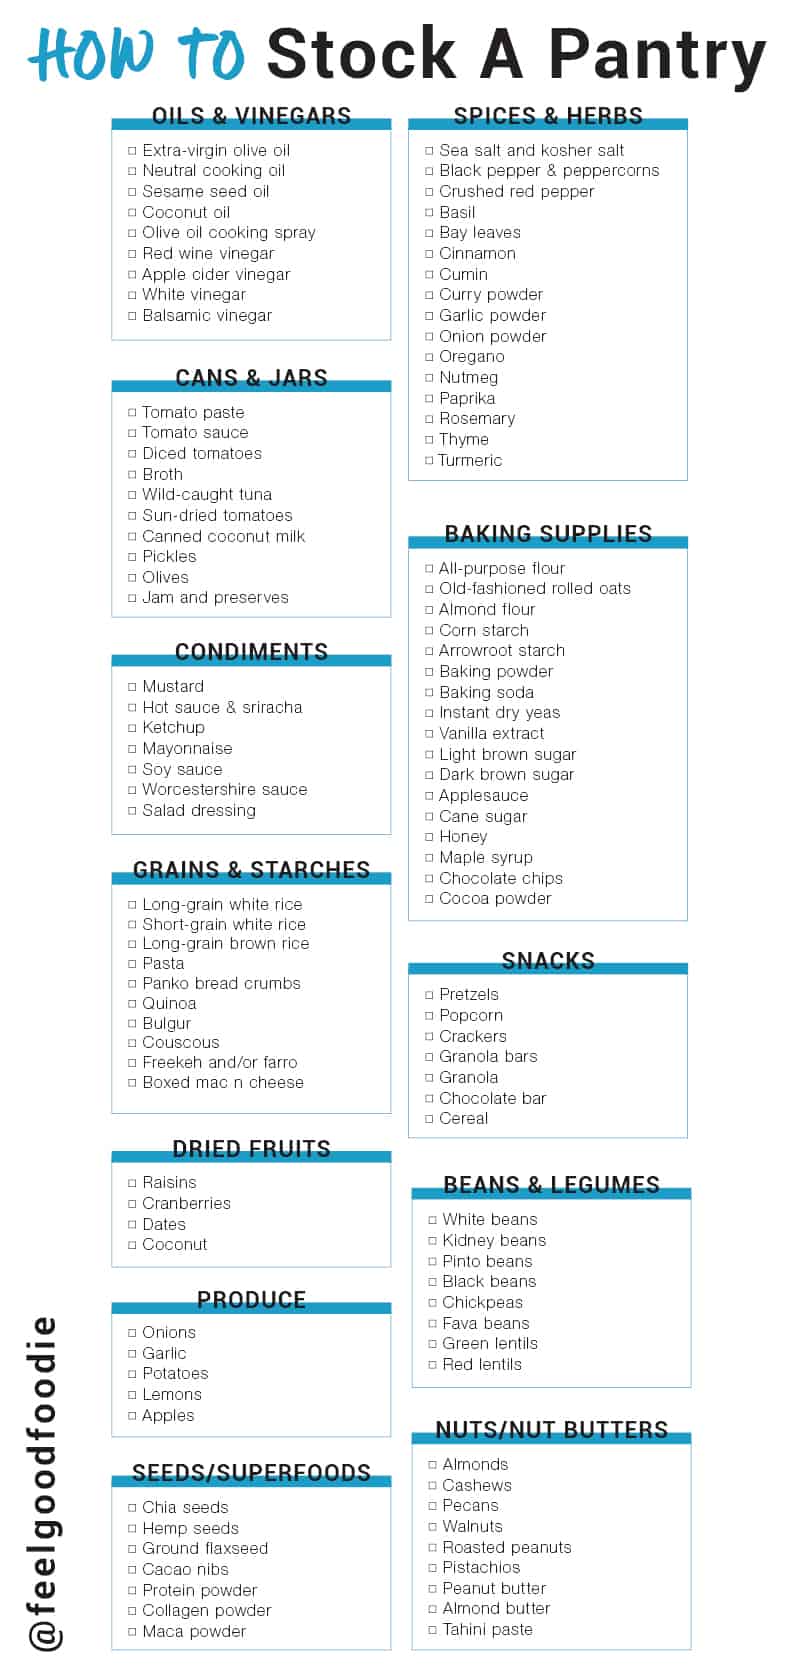 Picture of a check list for stocking a pantry